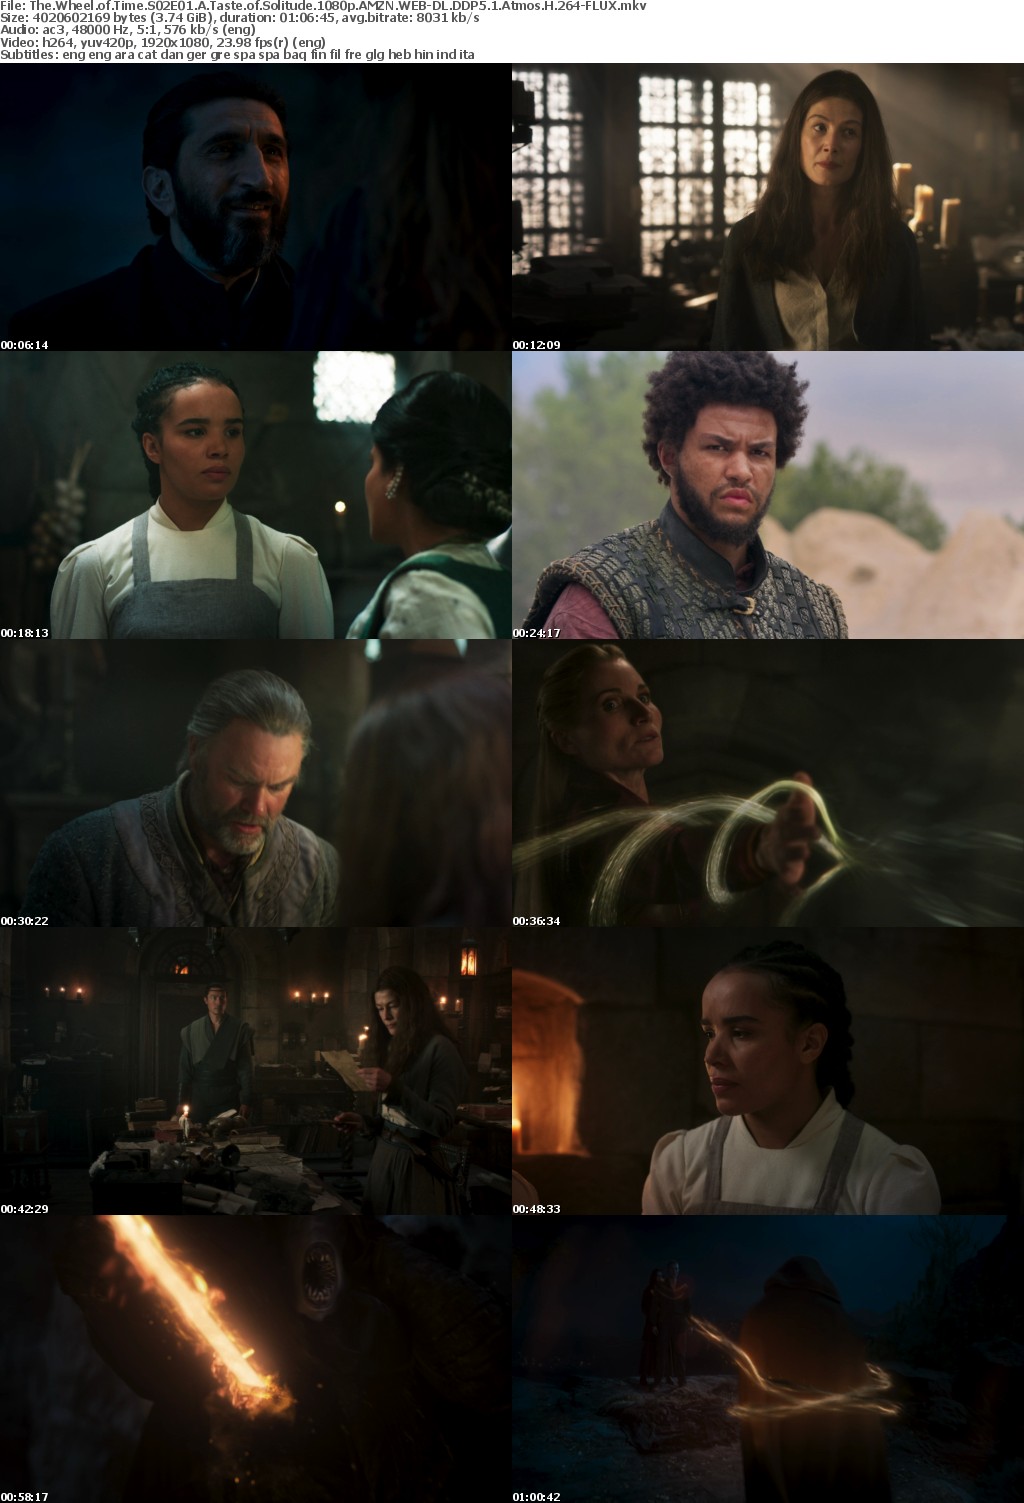 The Wheel of Time S02E01 A Taste of Solitude 1080p AMZN WEB-DL DDP5 1 Atmos H 264-FLUX